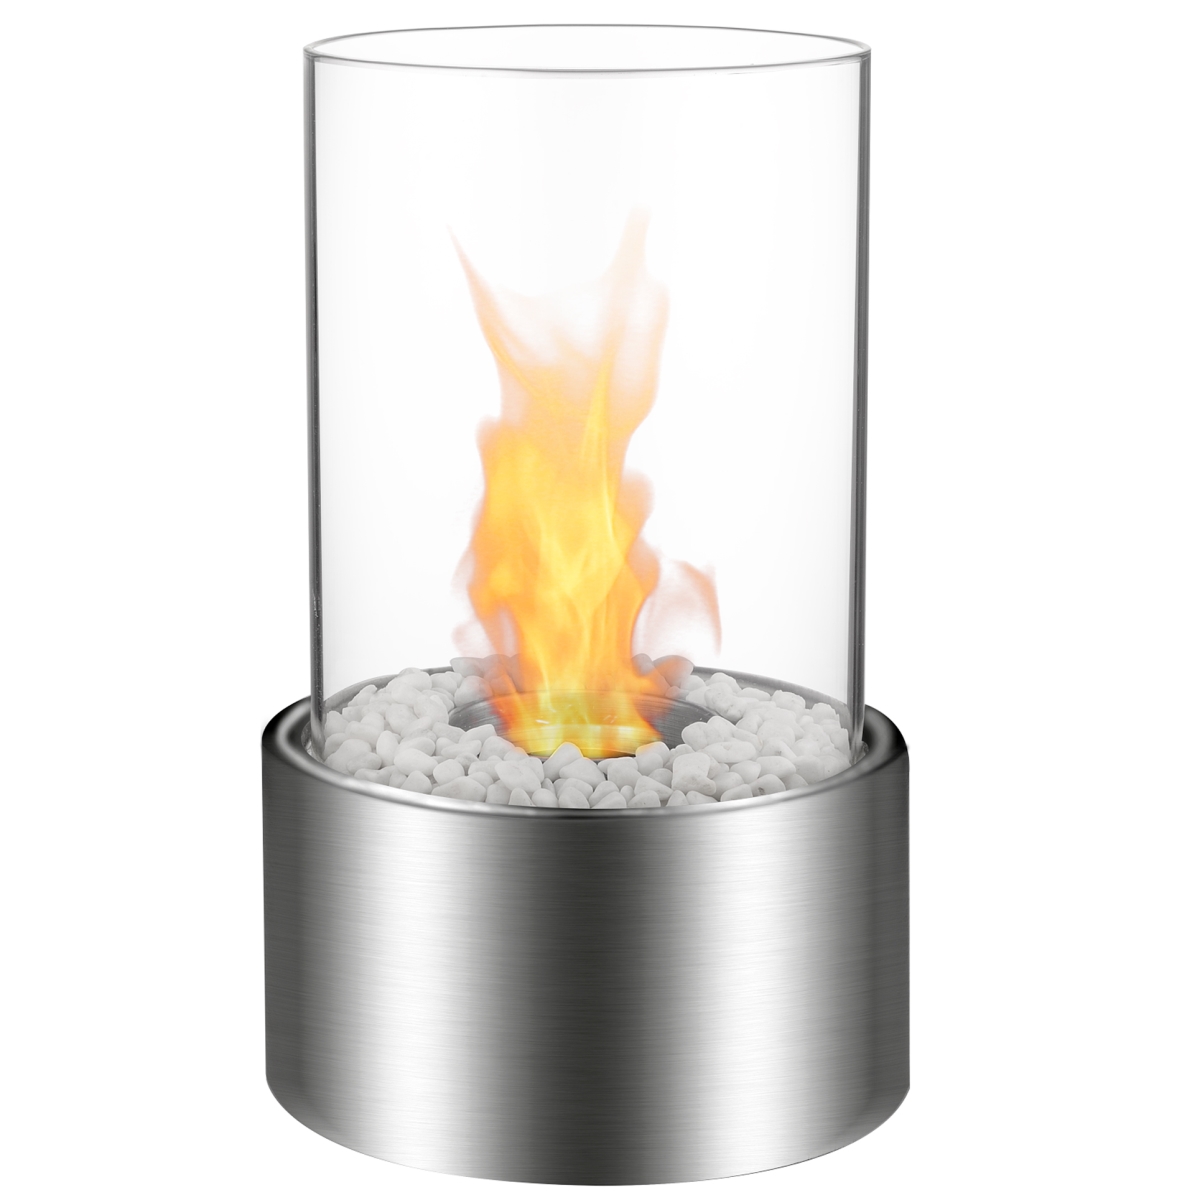 Et7001ss Eden Ventless Tabletop Portable Bio Ethanol Fireplace In Stainless Steel